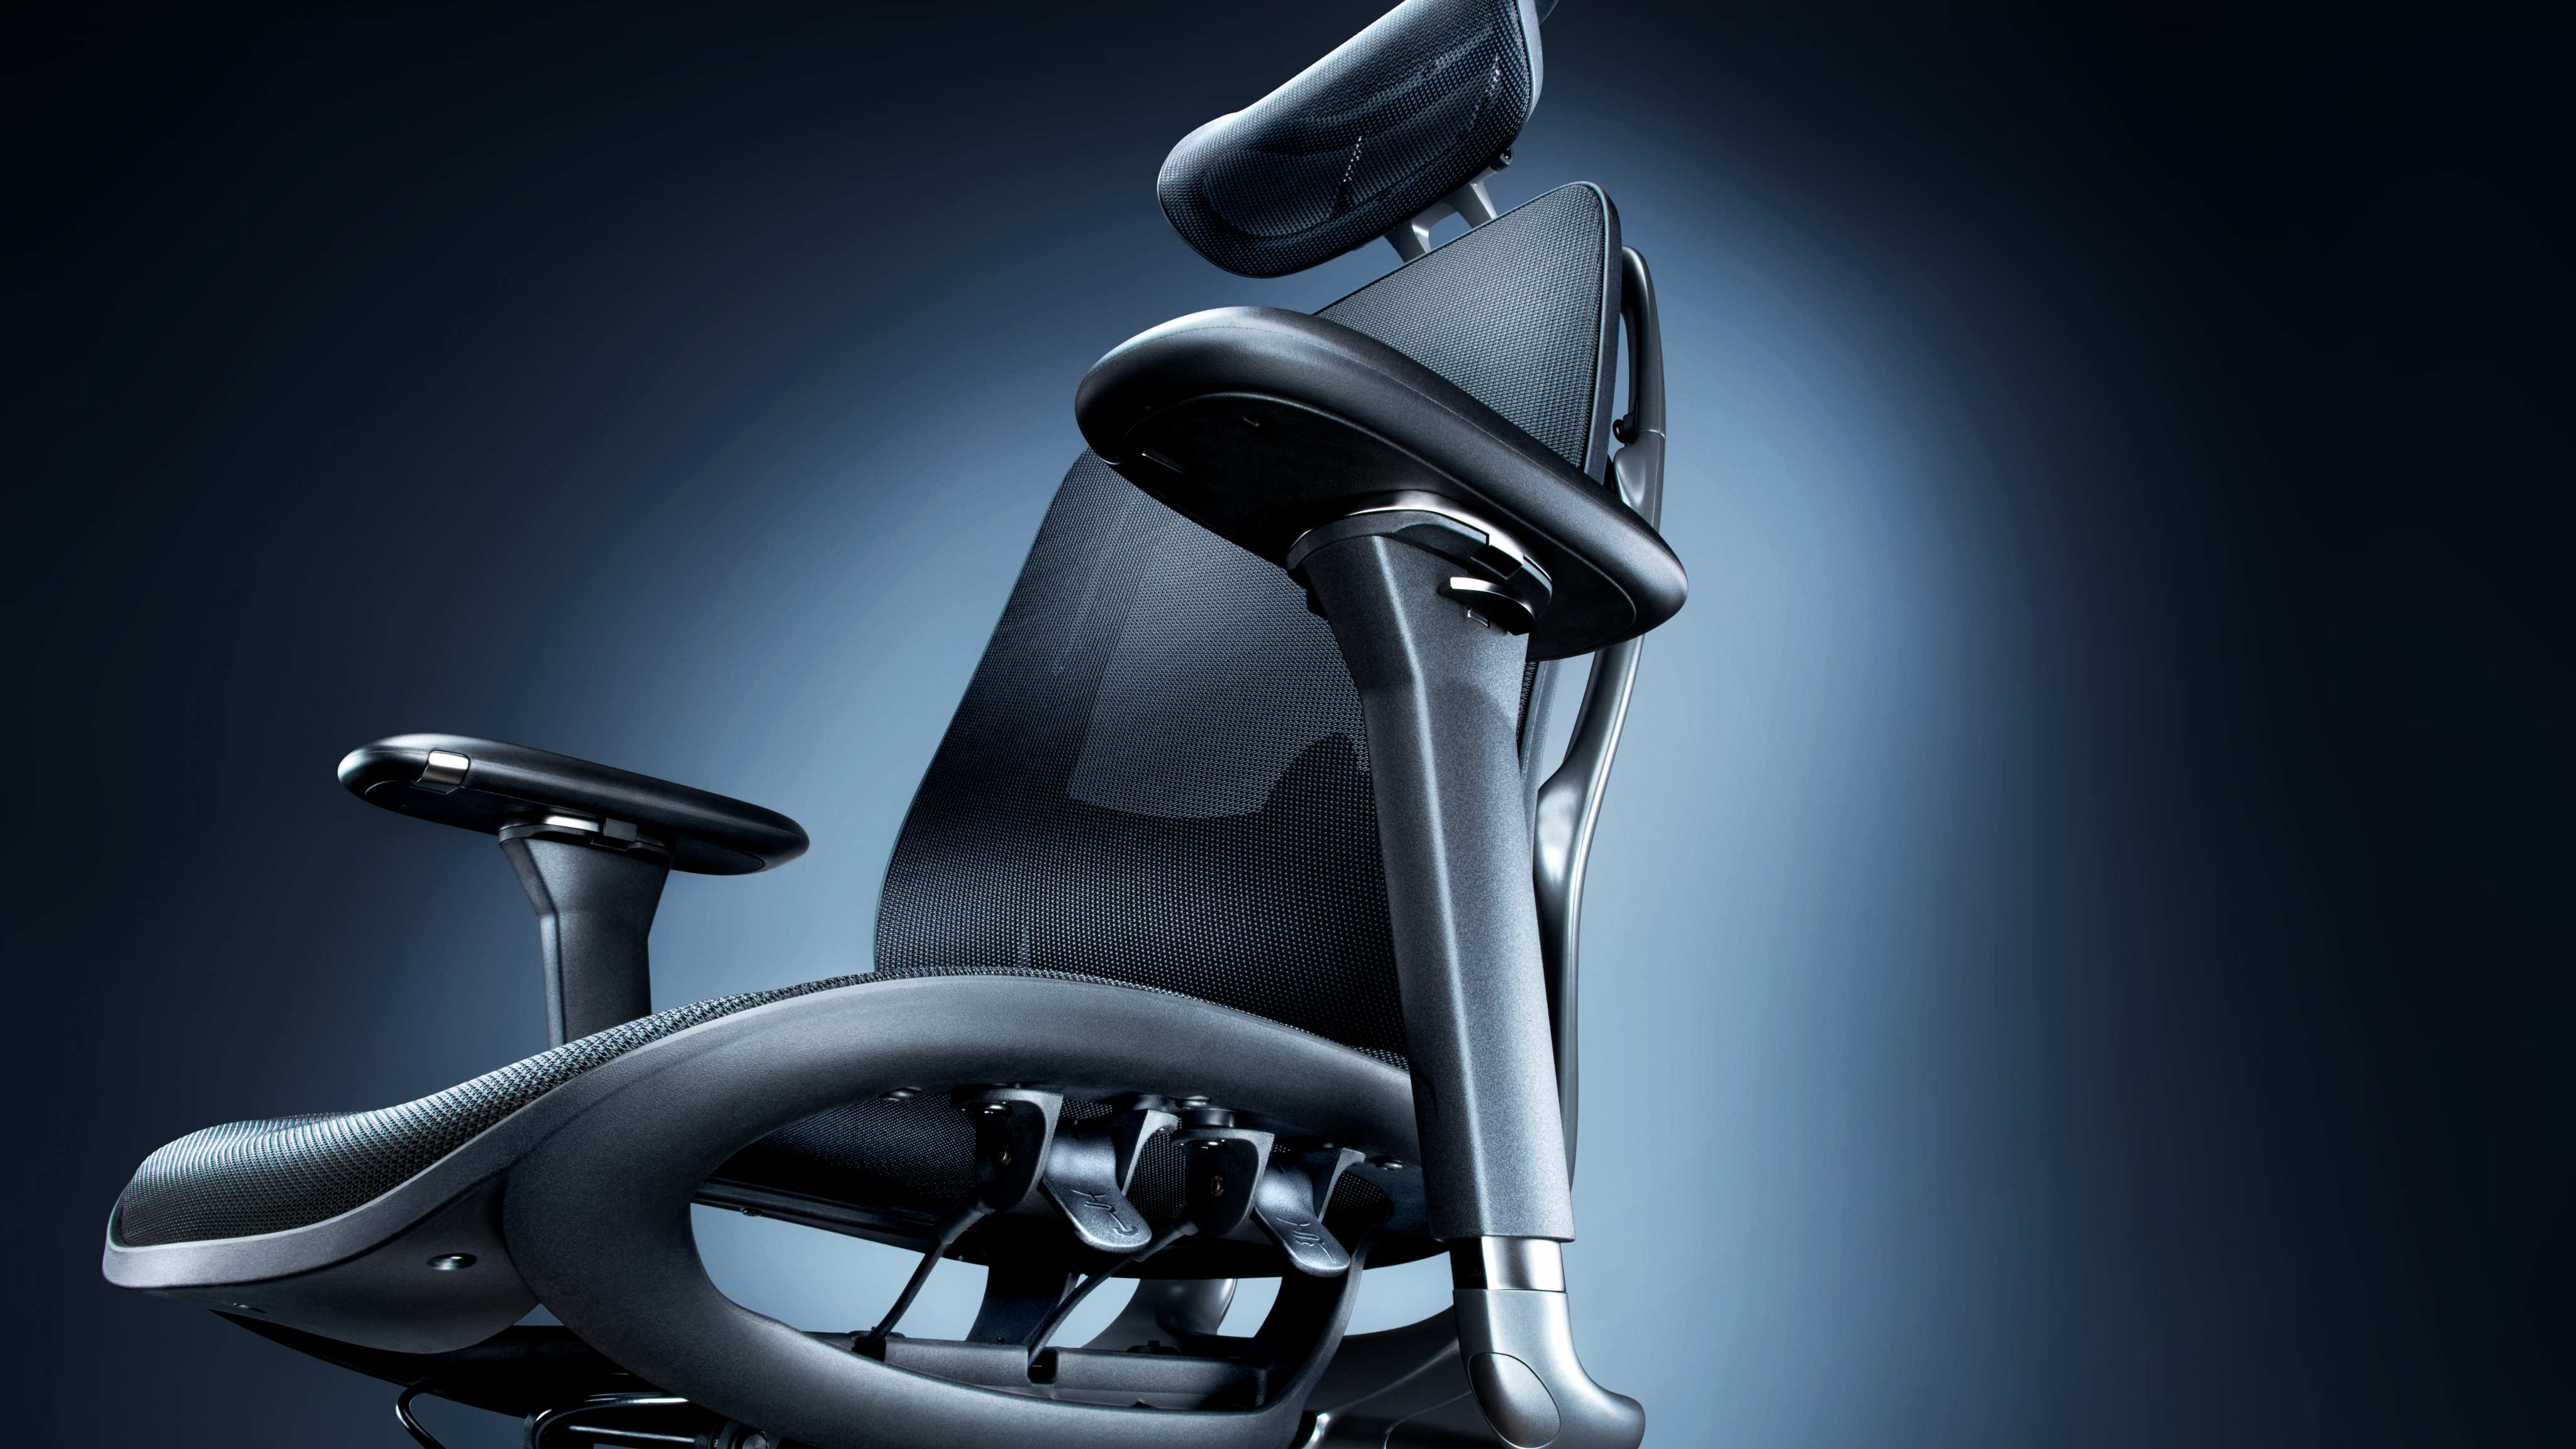 Razer expands its high-end chair lineup with the new, ergonomic mesh Fujin Pro